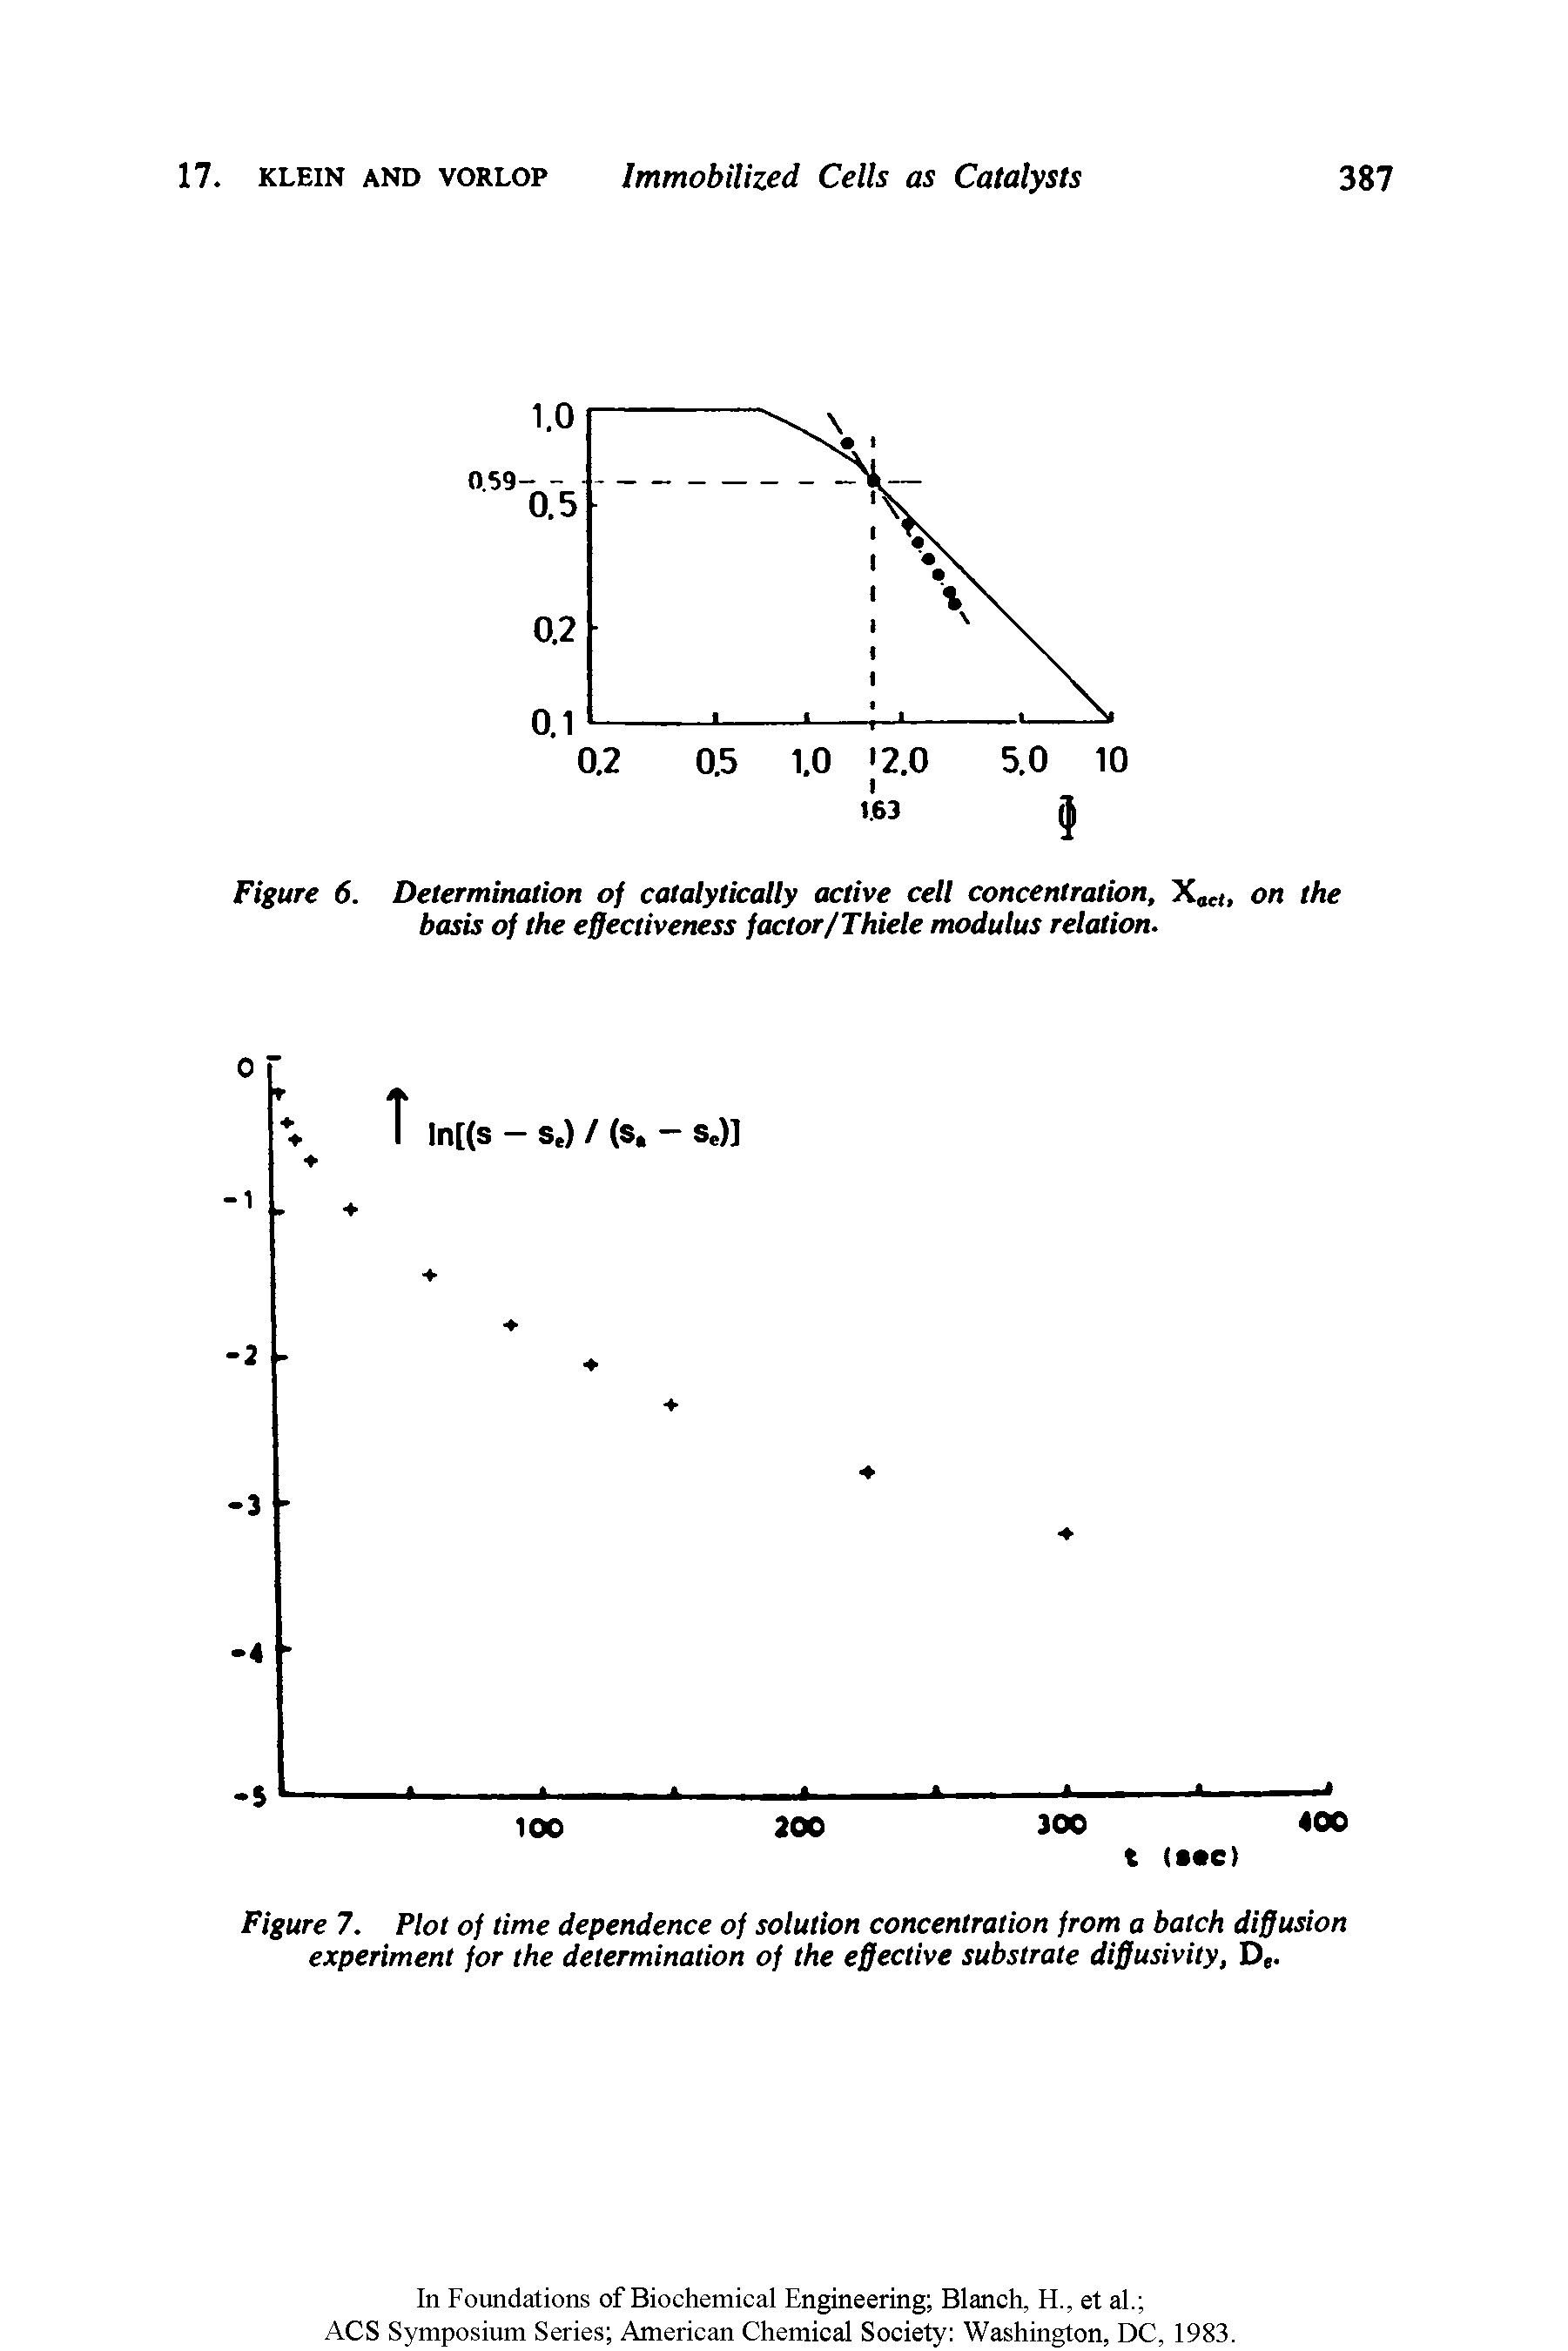 Figure 6. Determination of catalytically active cell concentration, X,ei. on the basis of the effectiveness factor/Thiele modulus relation.